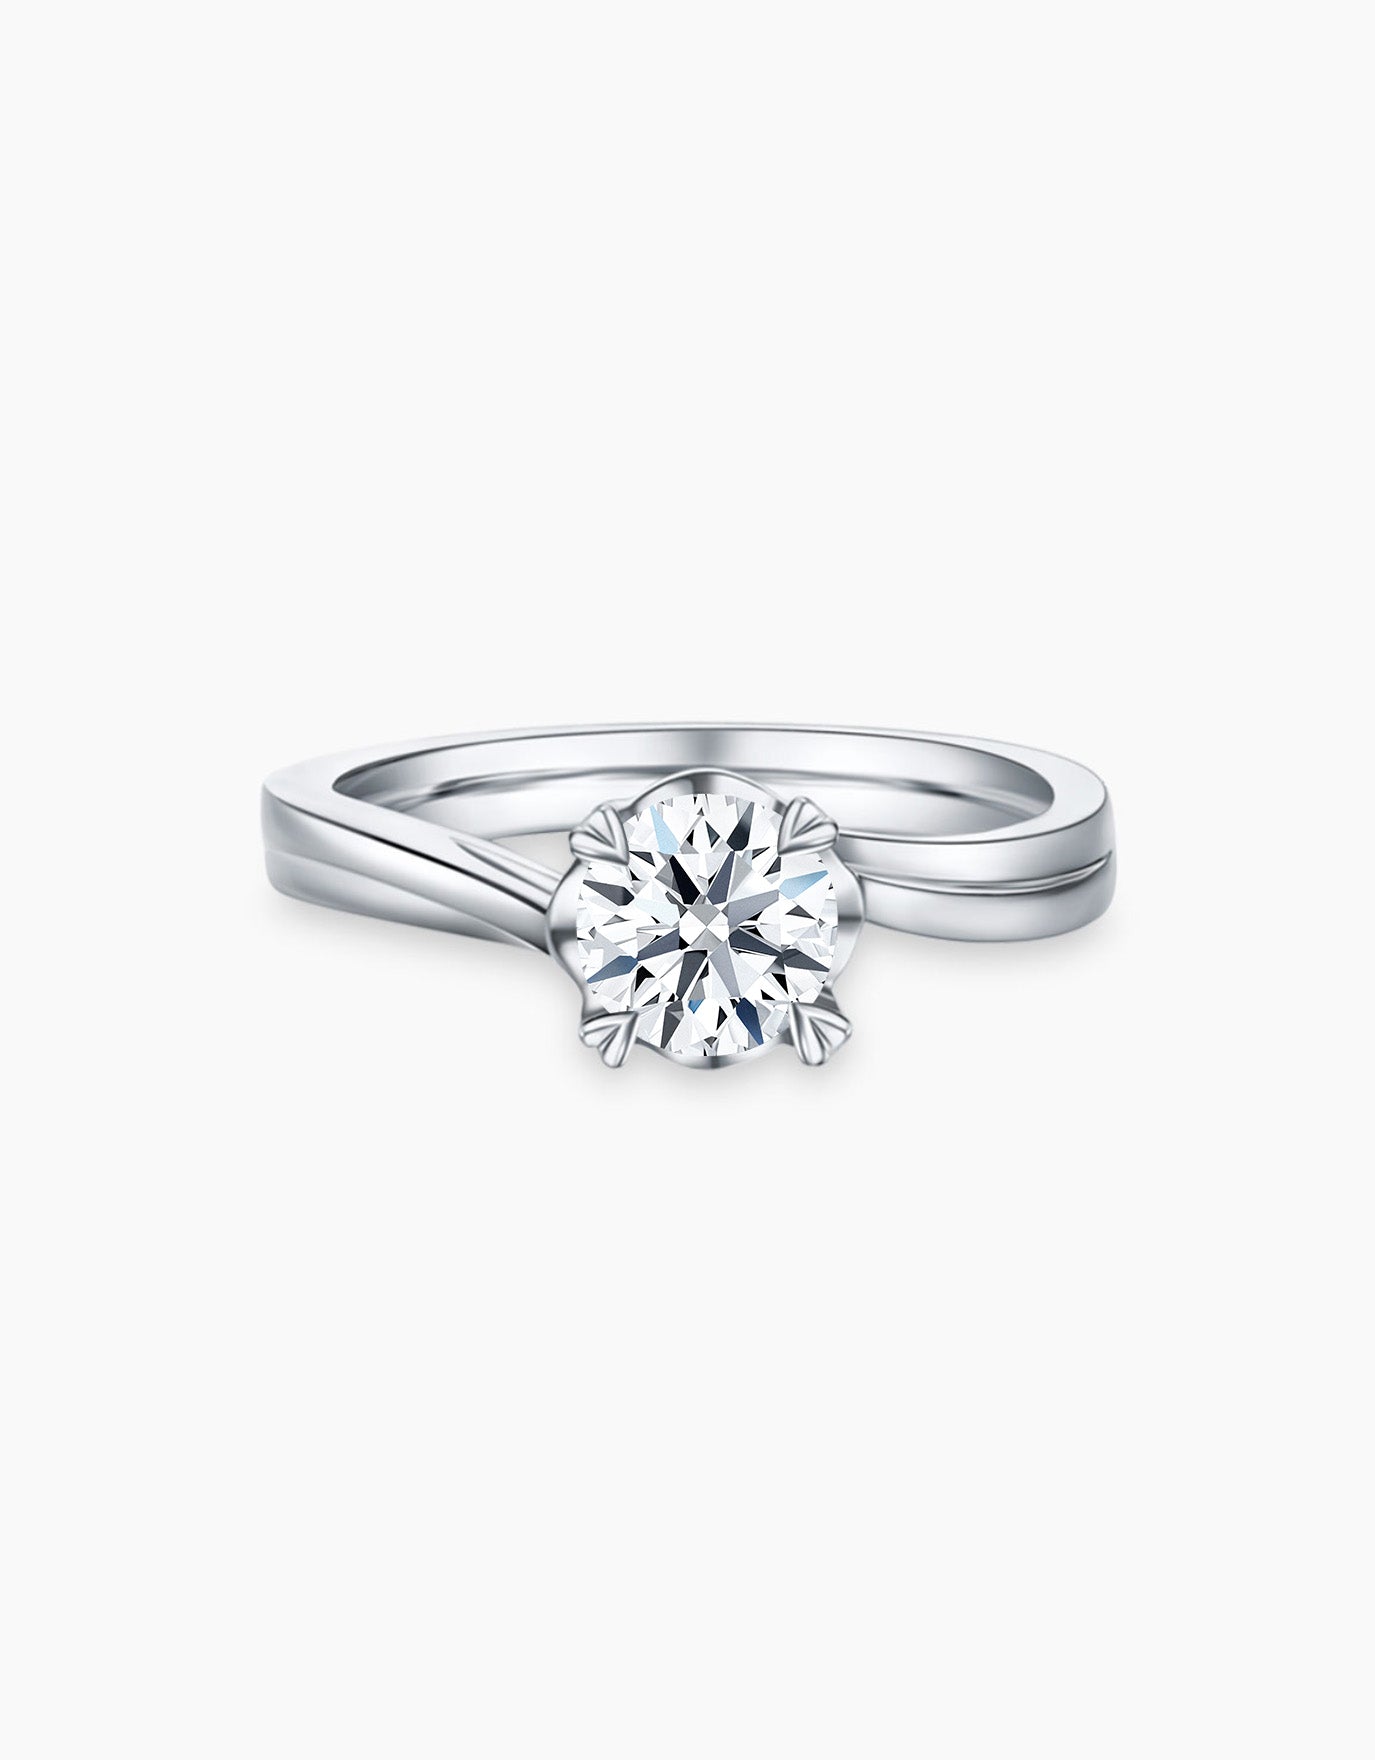 LVC Precieux Endear Diamond Ring with Heart Shaped Prongs